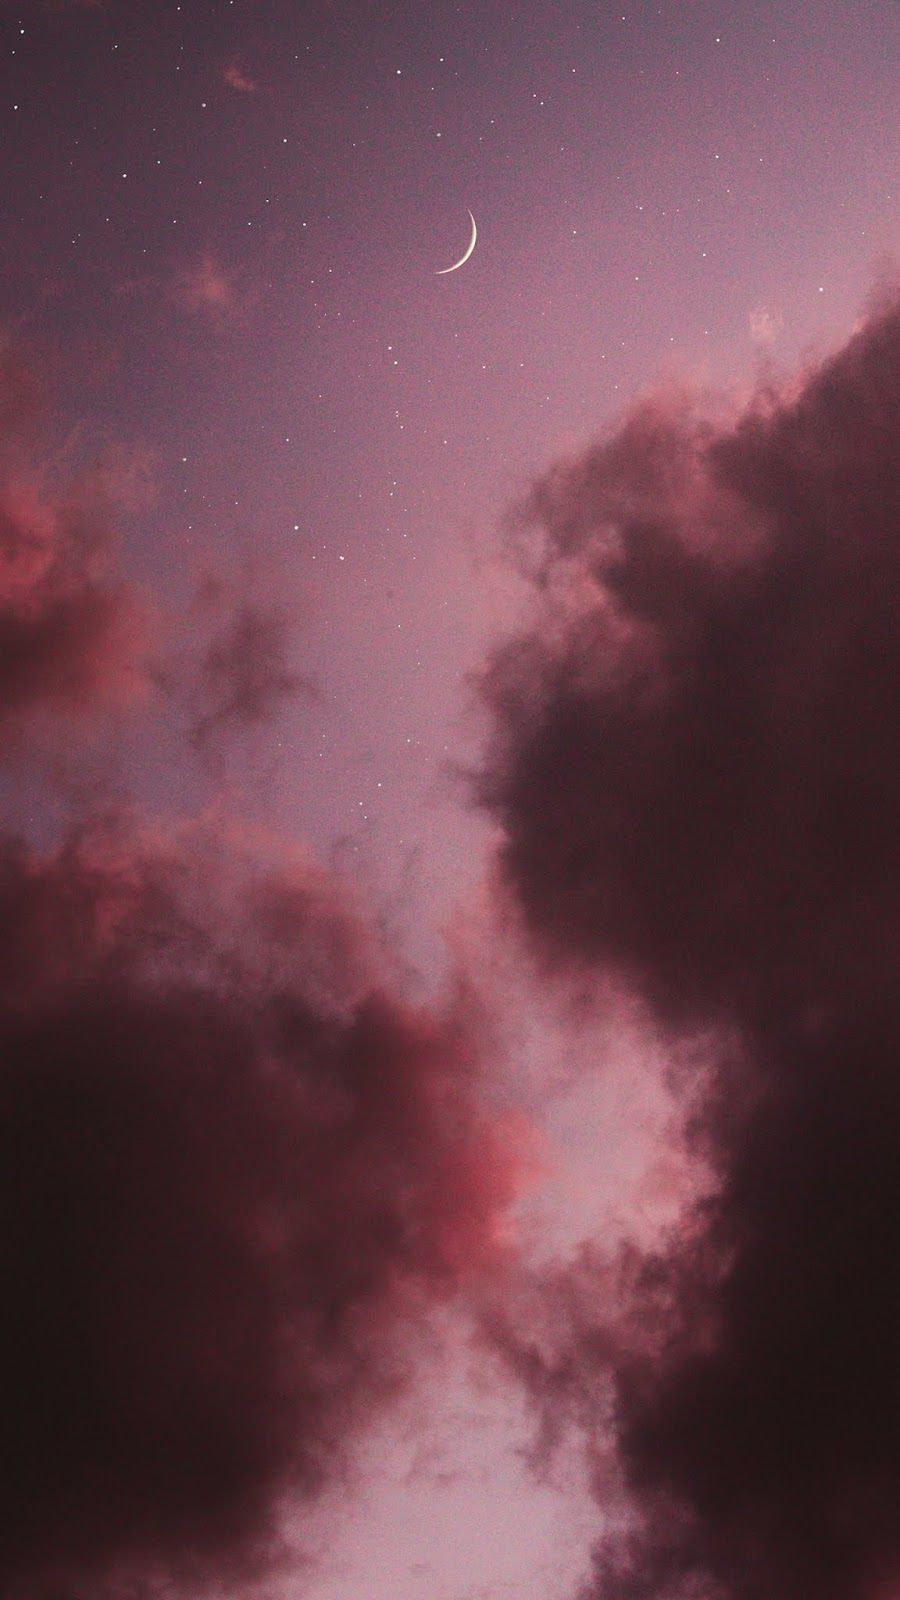 IPhone wallpaper of a pink sky with a crescent moon and stars. - Moon